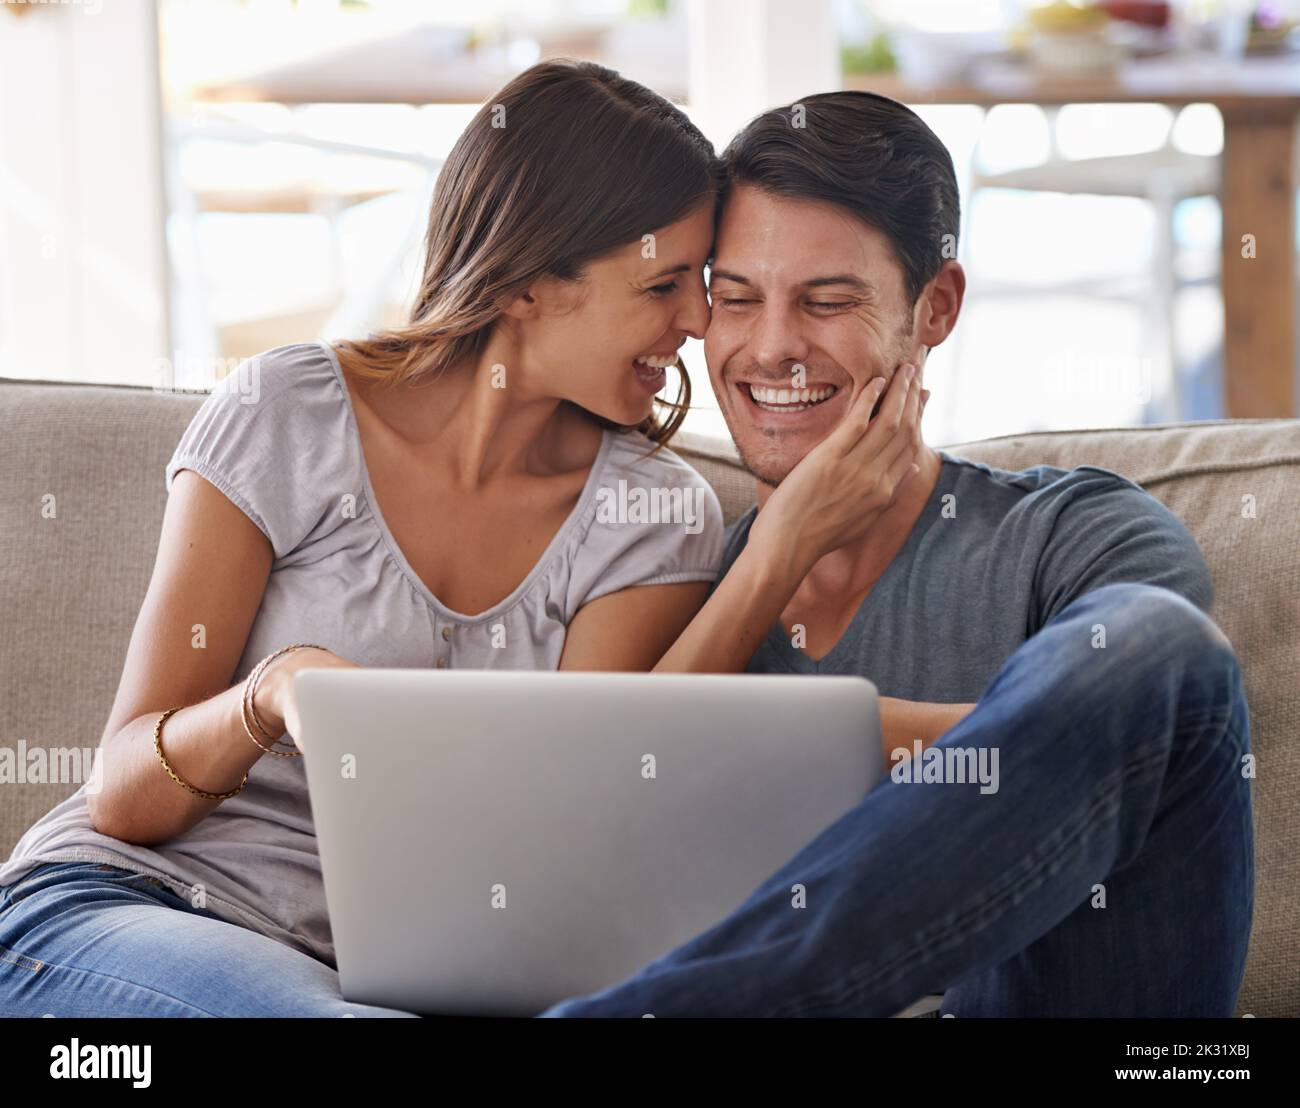 Caught in the web of her love. an affectionate young couple spending quality time together. Stock Photo